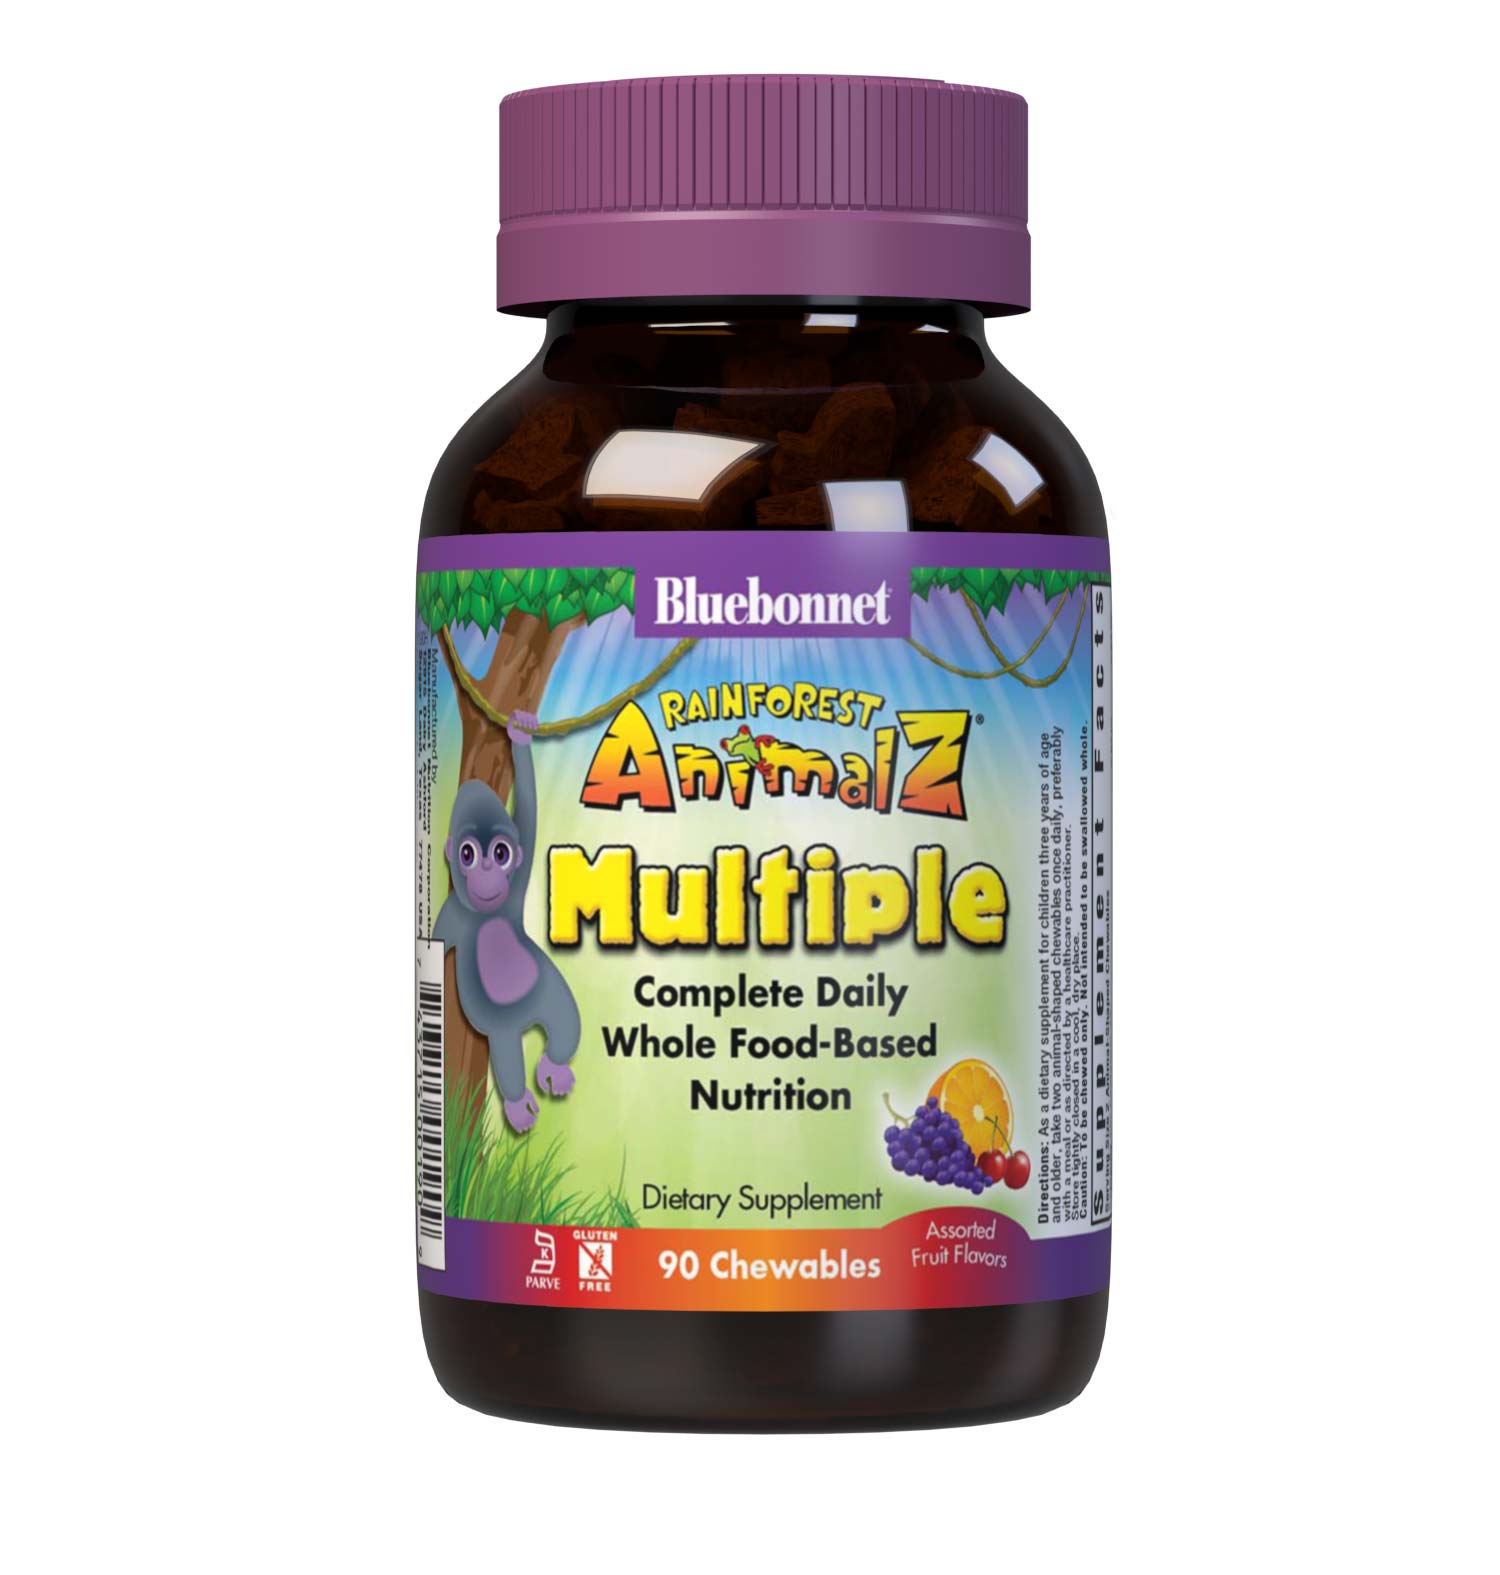 DAILY MULTI WHOLE FOOD-BASED MULTIVITAMIN (With Iron)